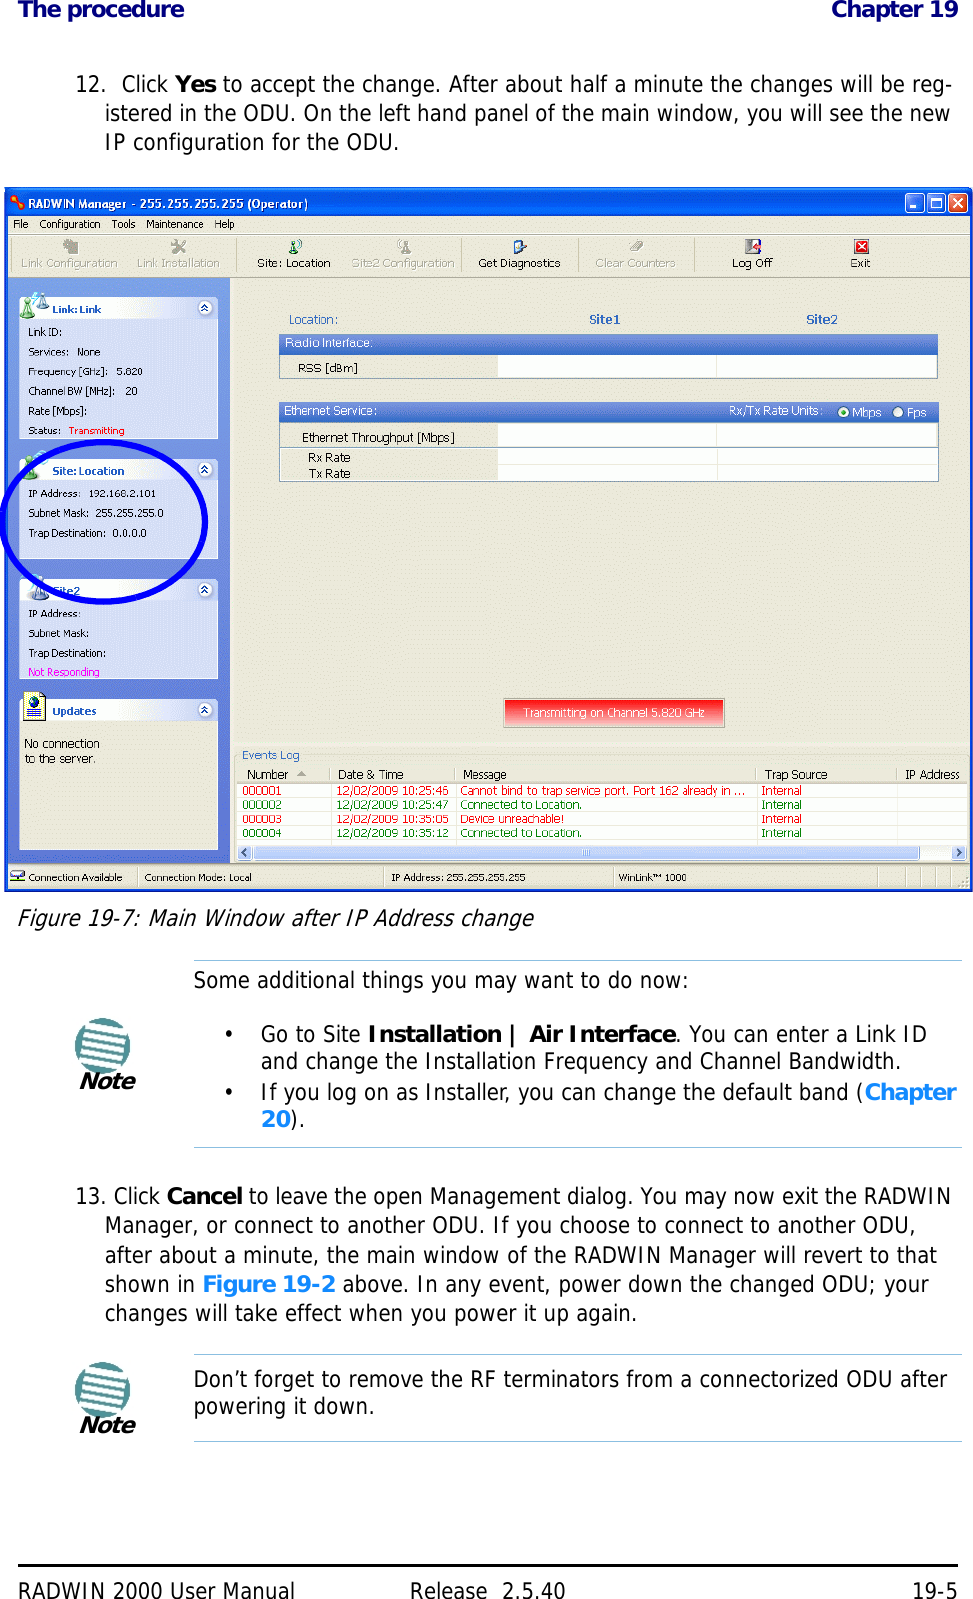 The procedure Chapter 19RADWIN 2000 User Manual Release  2.5.40 19-512.  Click Yes to accept the change. After about half a minute the changes will be reg-istered in the ODU. On the left hand panel of the main window, you will see the new IP configuration for the ODU.Figure 19-7: Main Window after IP Address change13. Click Cancel to leave the open Management dialog. You may now exit the RADWIN Manager, or connect to another ODU. If you choose to connect to another ODU, after about a minute, the main window of the RADWIN Manager will revert to that shown in Figure 19-2 above. In any event, power down the changed ODU; your changes will take effect when you power it up again.NoteSome additional things you may want to do now:•Go to Site Installation | Air Interface. You can enter a Link ID and change the Installation Frequency and Channel Bandwidth.• If you log on as Installer, you can change the default band (Chapter 20).NoteDon’t forget to remove the RF terminators from a connectorized ODU after powering it down.